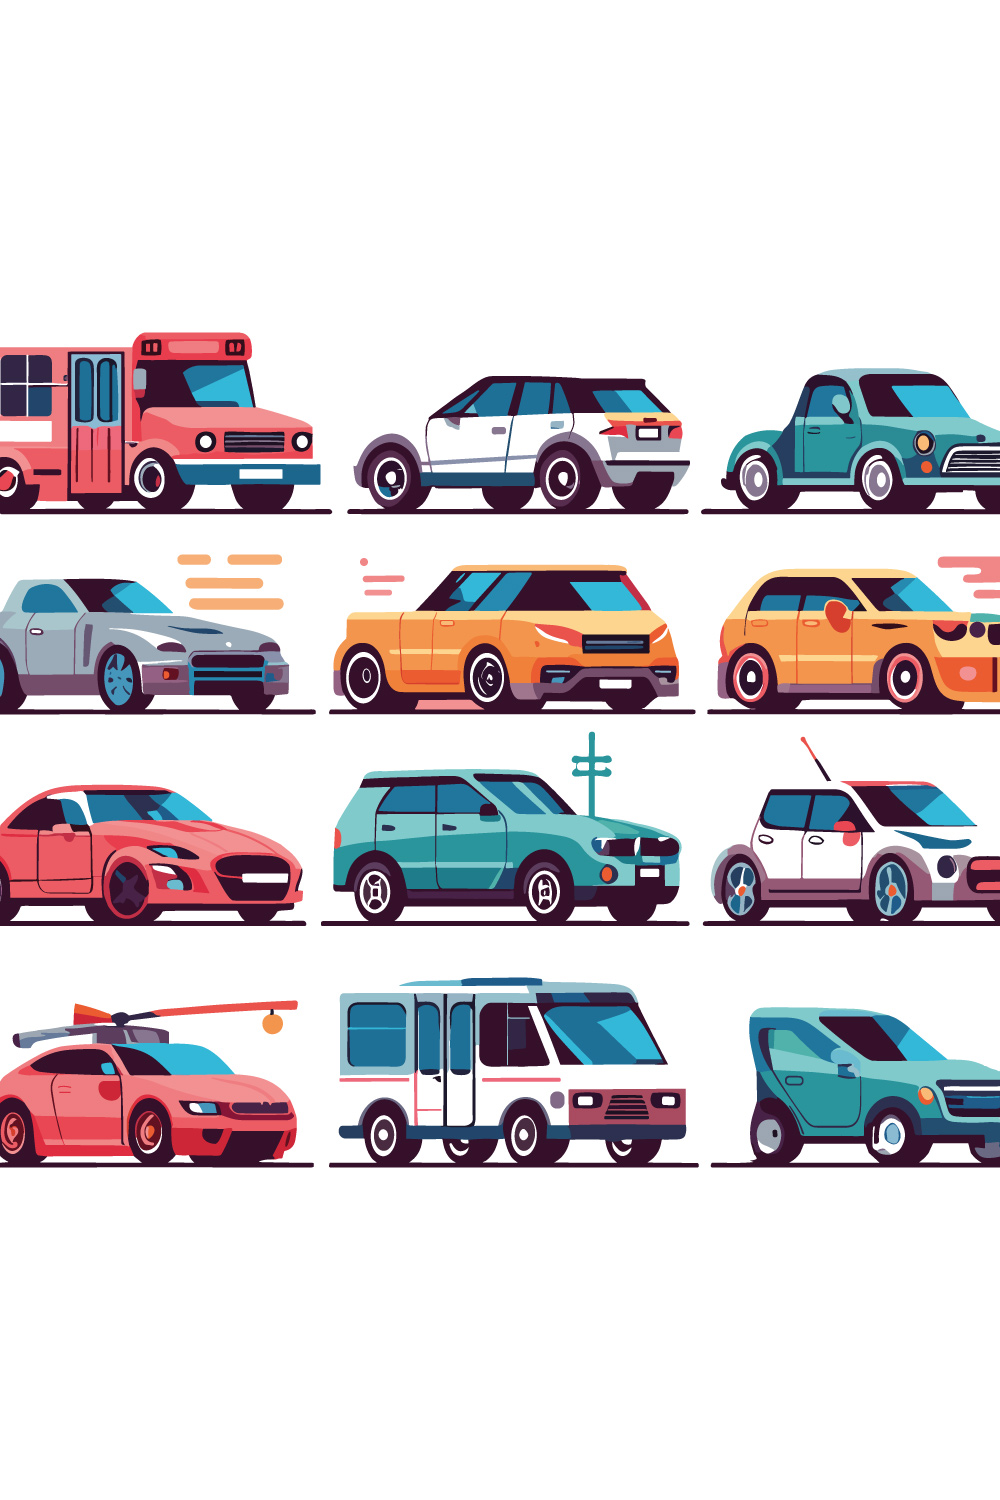 3d car icons isometric realistic, cars set of different models pinterest preview image.